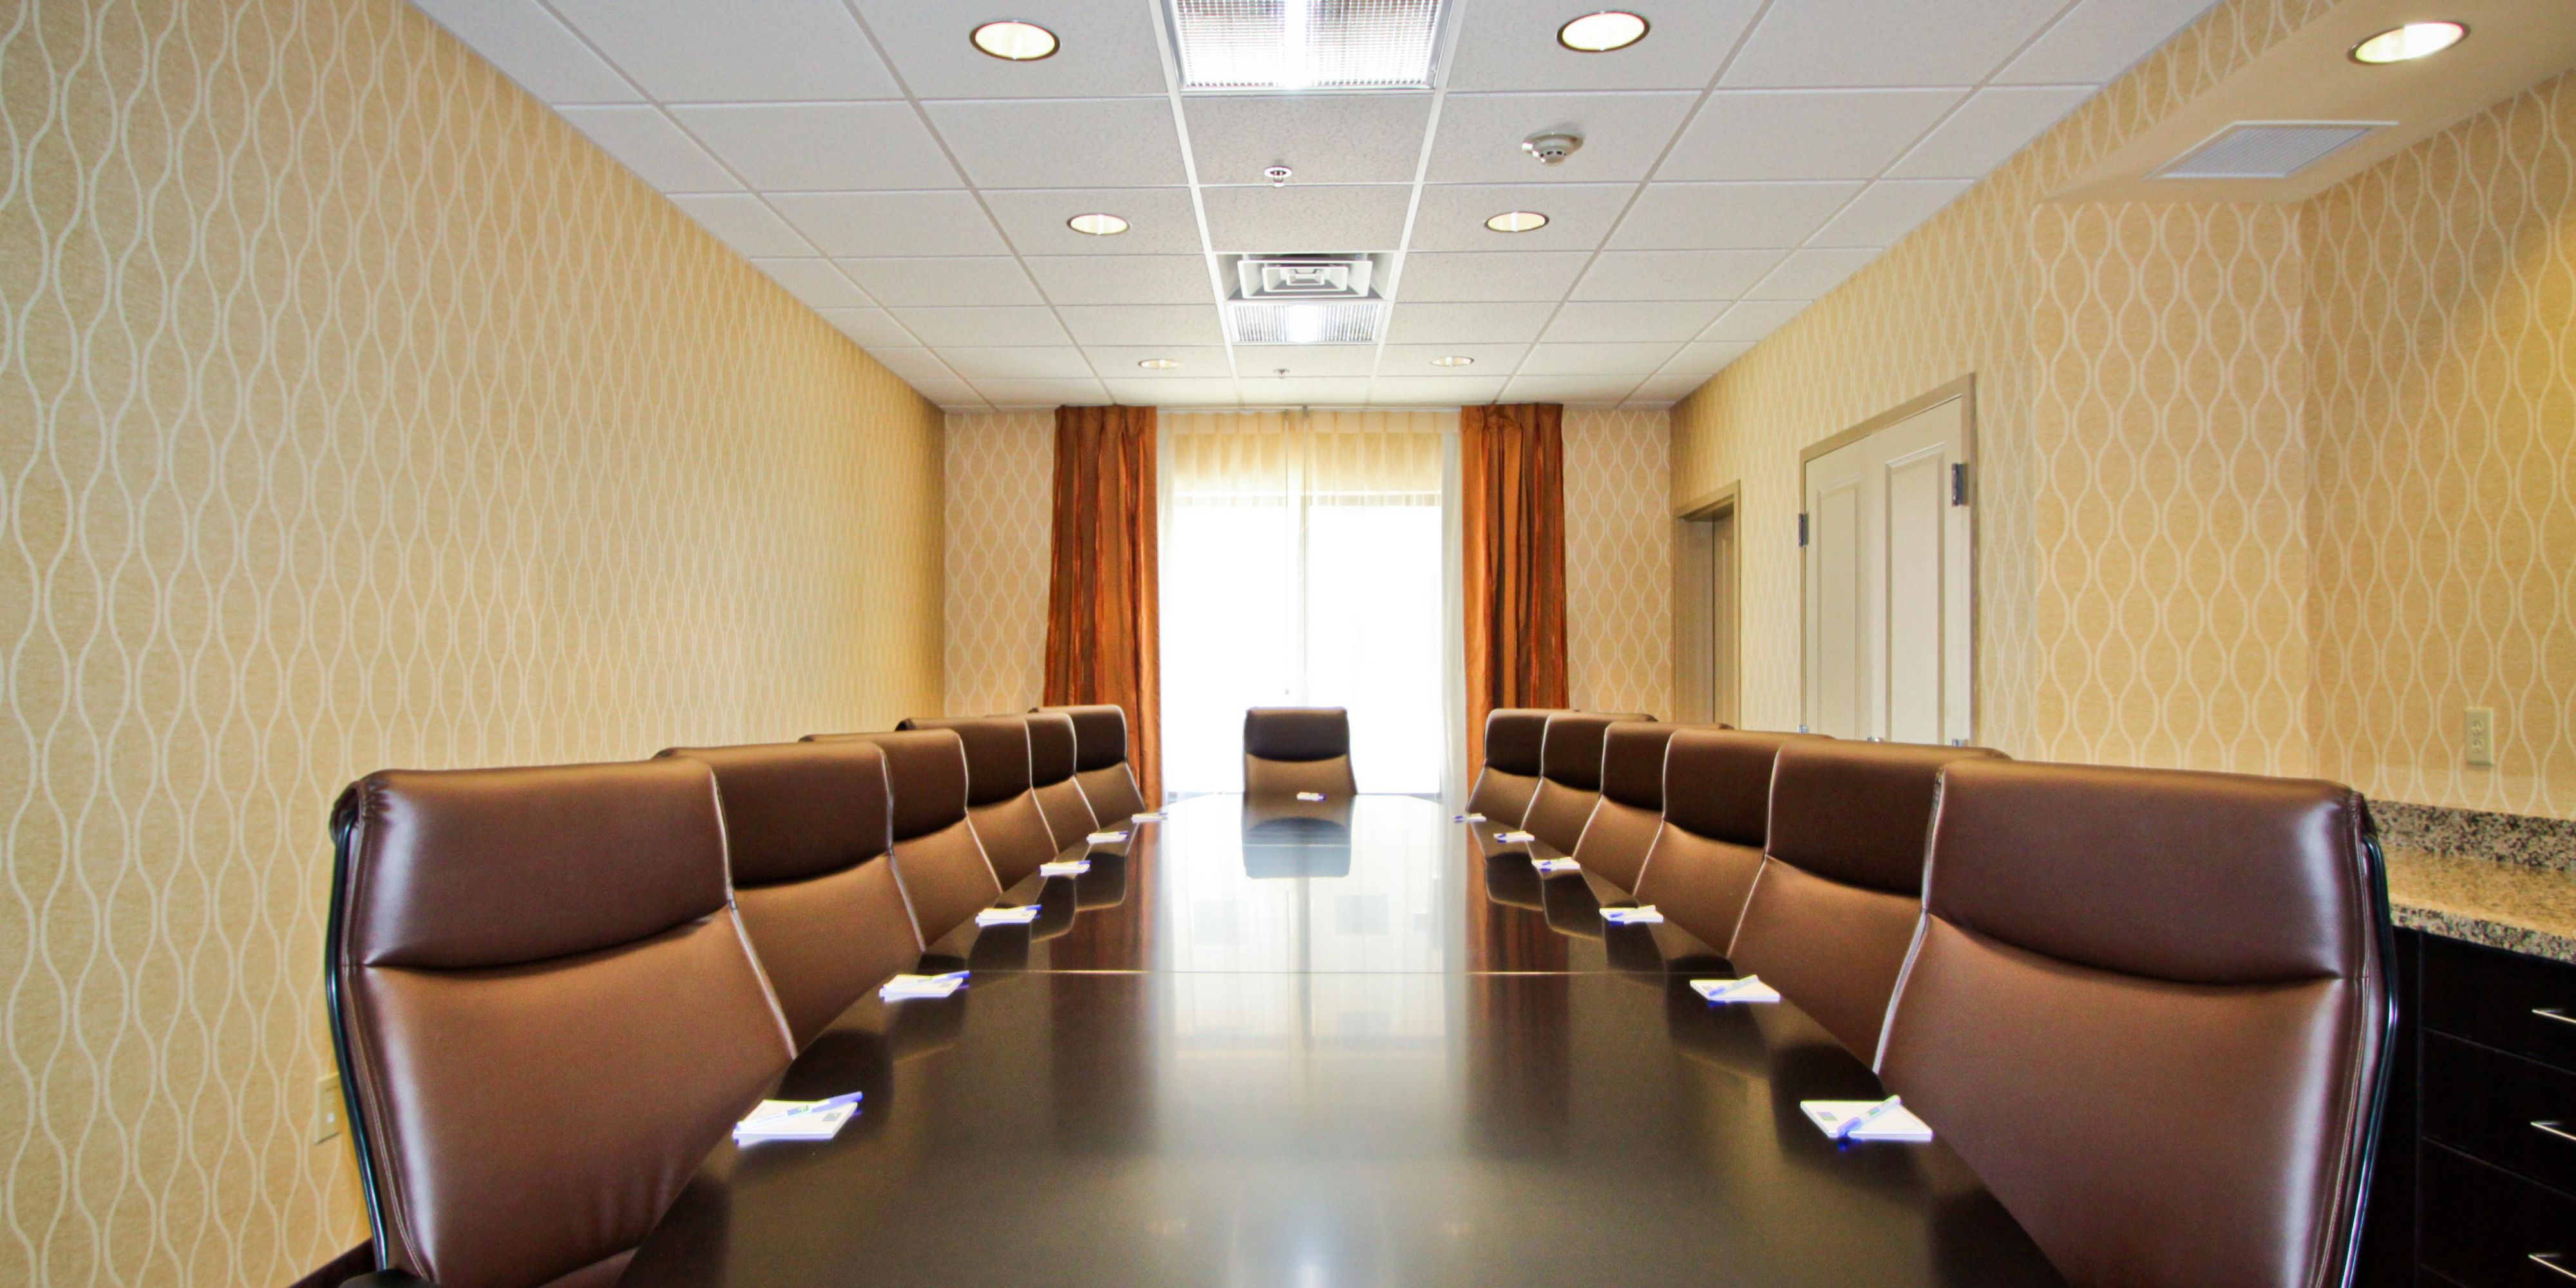 Our Executive Boardroom is ideal for small meetings or company interviews, with complimentary wireless internet and seating for up to 14 attendees. Audio/Visual, beverage services, and snacks are all available. For pricing and availability contact CJ Getty at cgetty@inntrusted.com or call directly at (406) 982-7406.